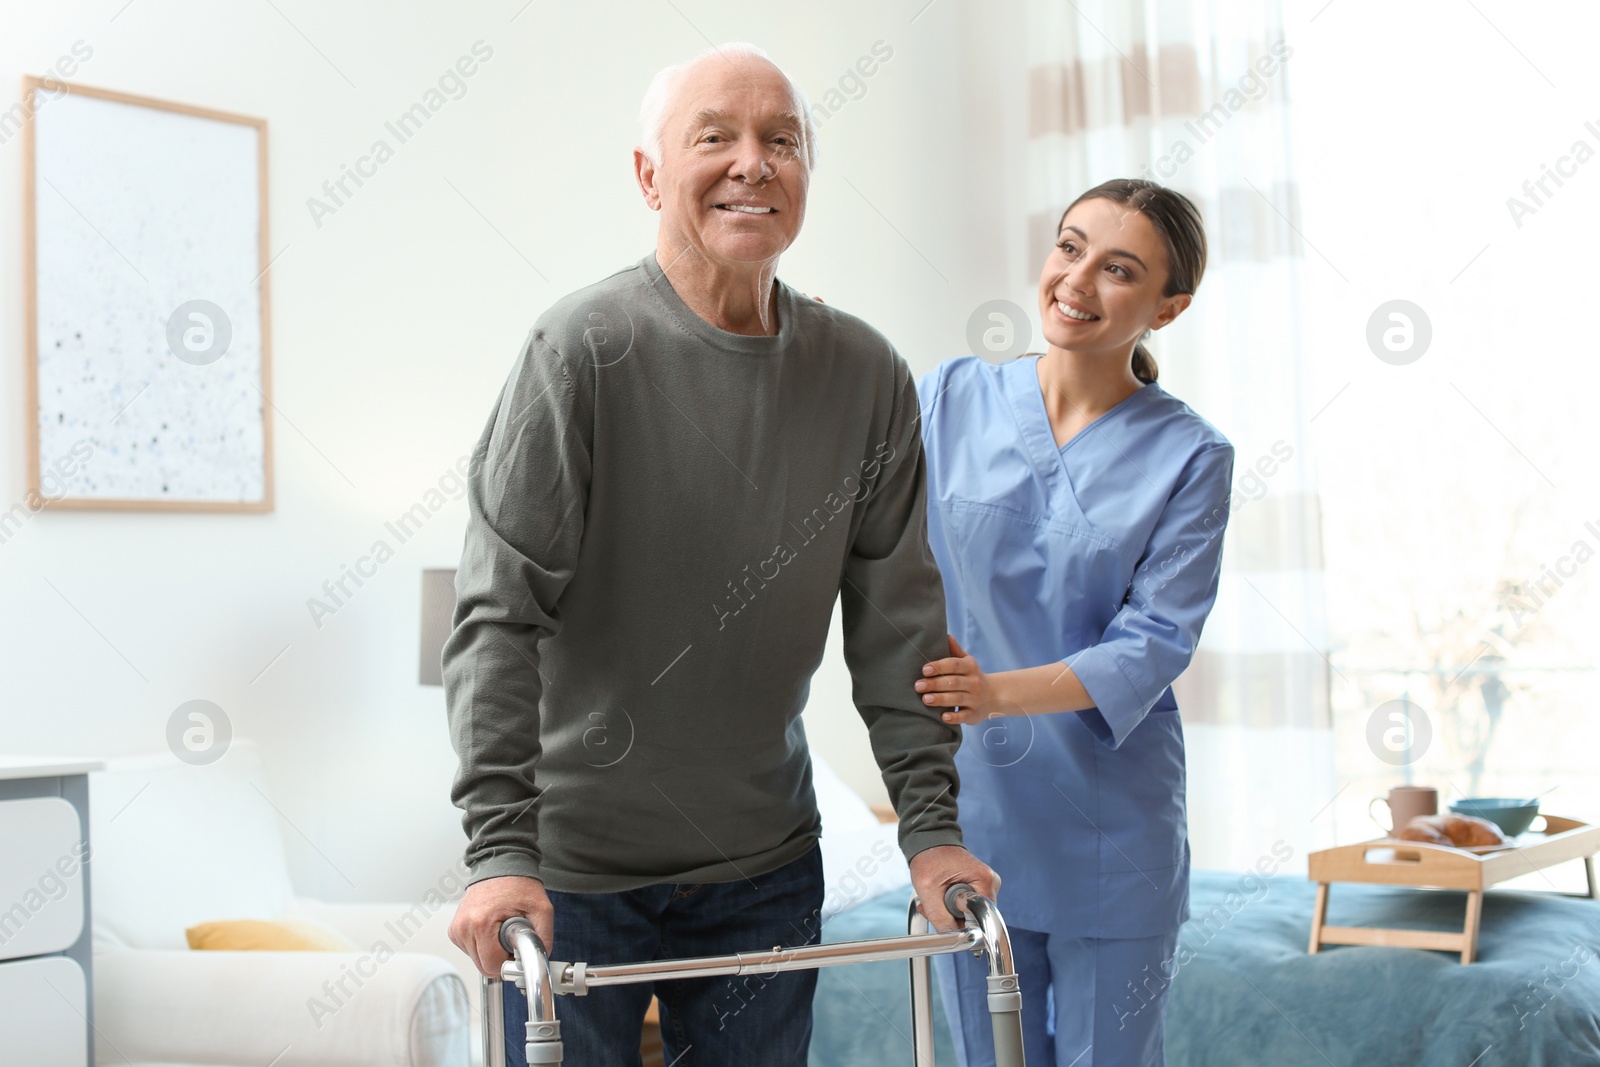 Photo of Care worker helping elderly man with walker in geriatric hospice